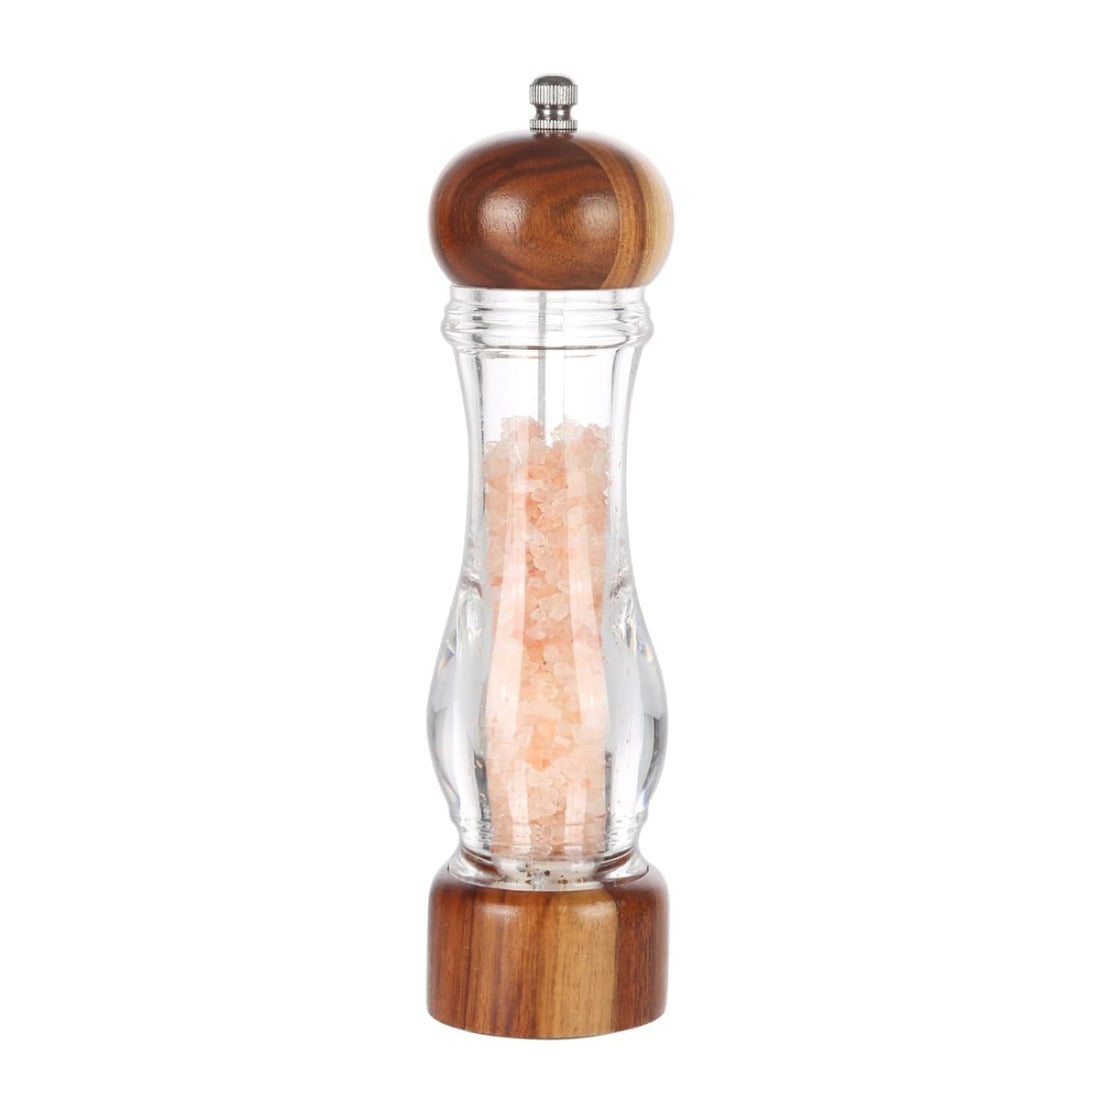 Ken's Kitchen Acrylic Salt and Pepper Grinder, Manual Salt and Pepper Mills, Wooden Shakers with Adjustable Ceramic Core,Salt Grinder and Pepper Mill, 8 Inches,1 Pack